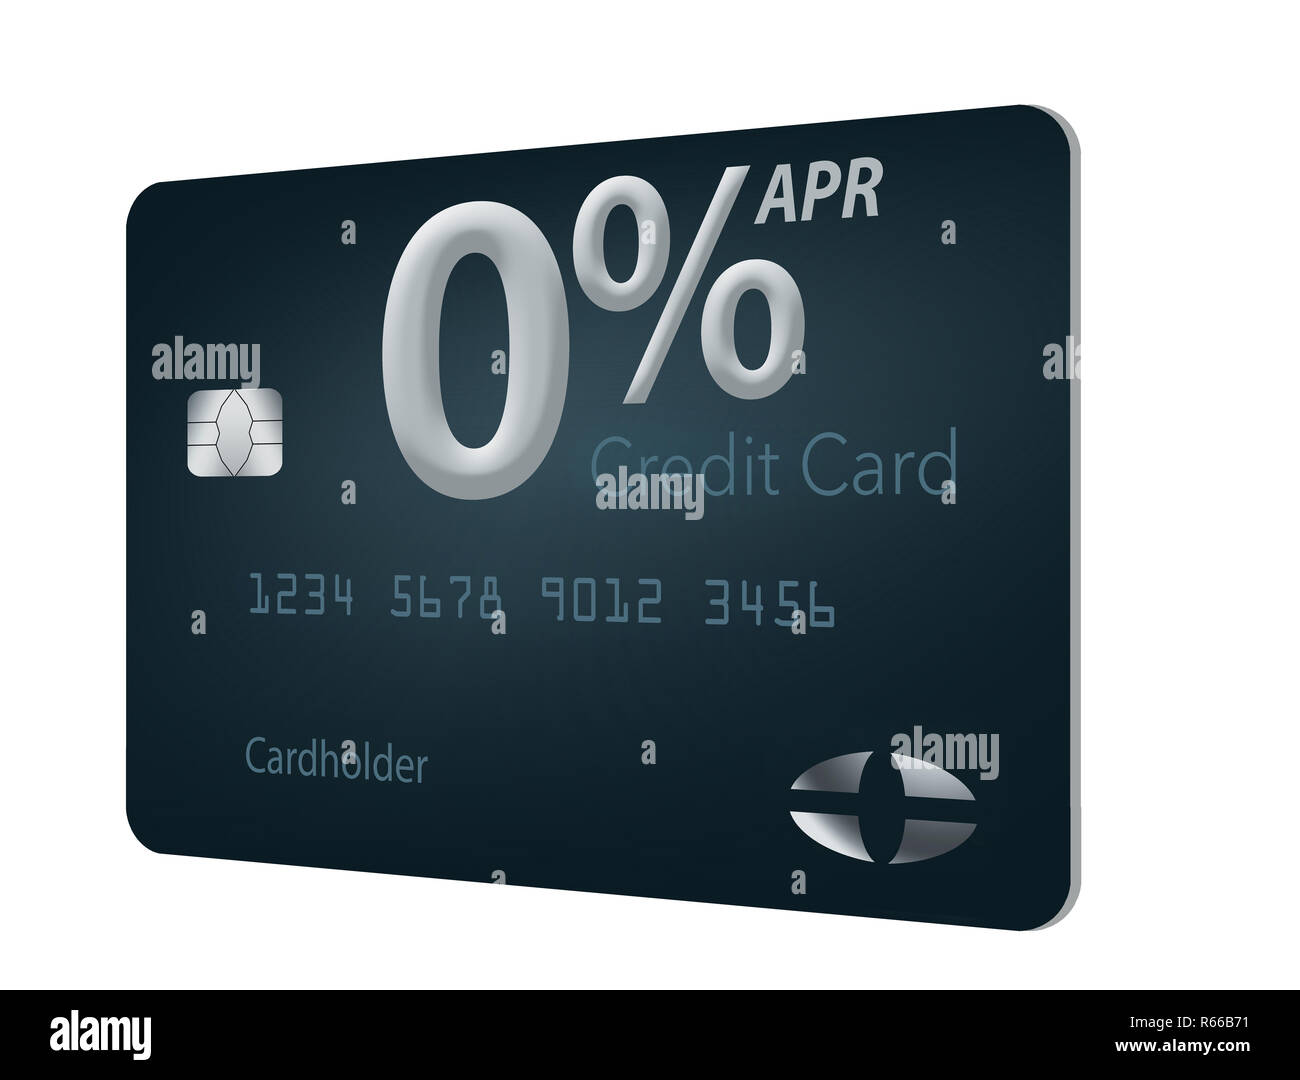 Many credit card offers now include zero percent annual percentage rate for 12-15 months and this generic mock card illustrates these offers. This is  Stock Photo